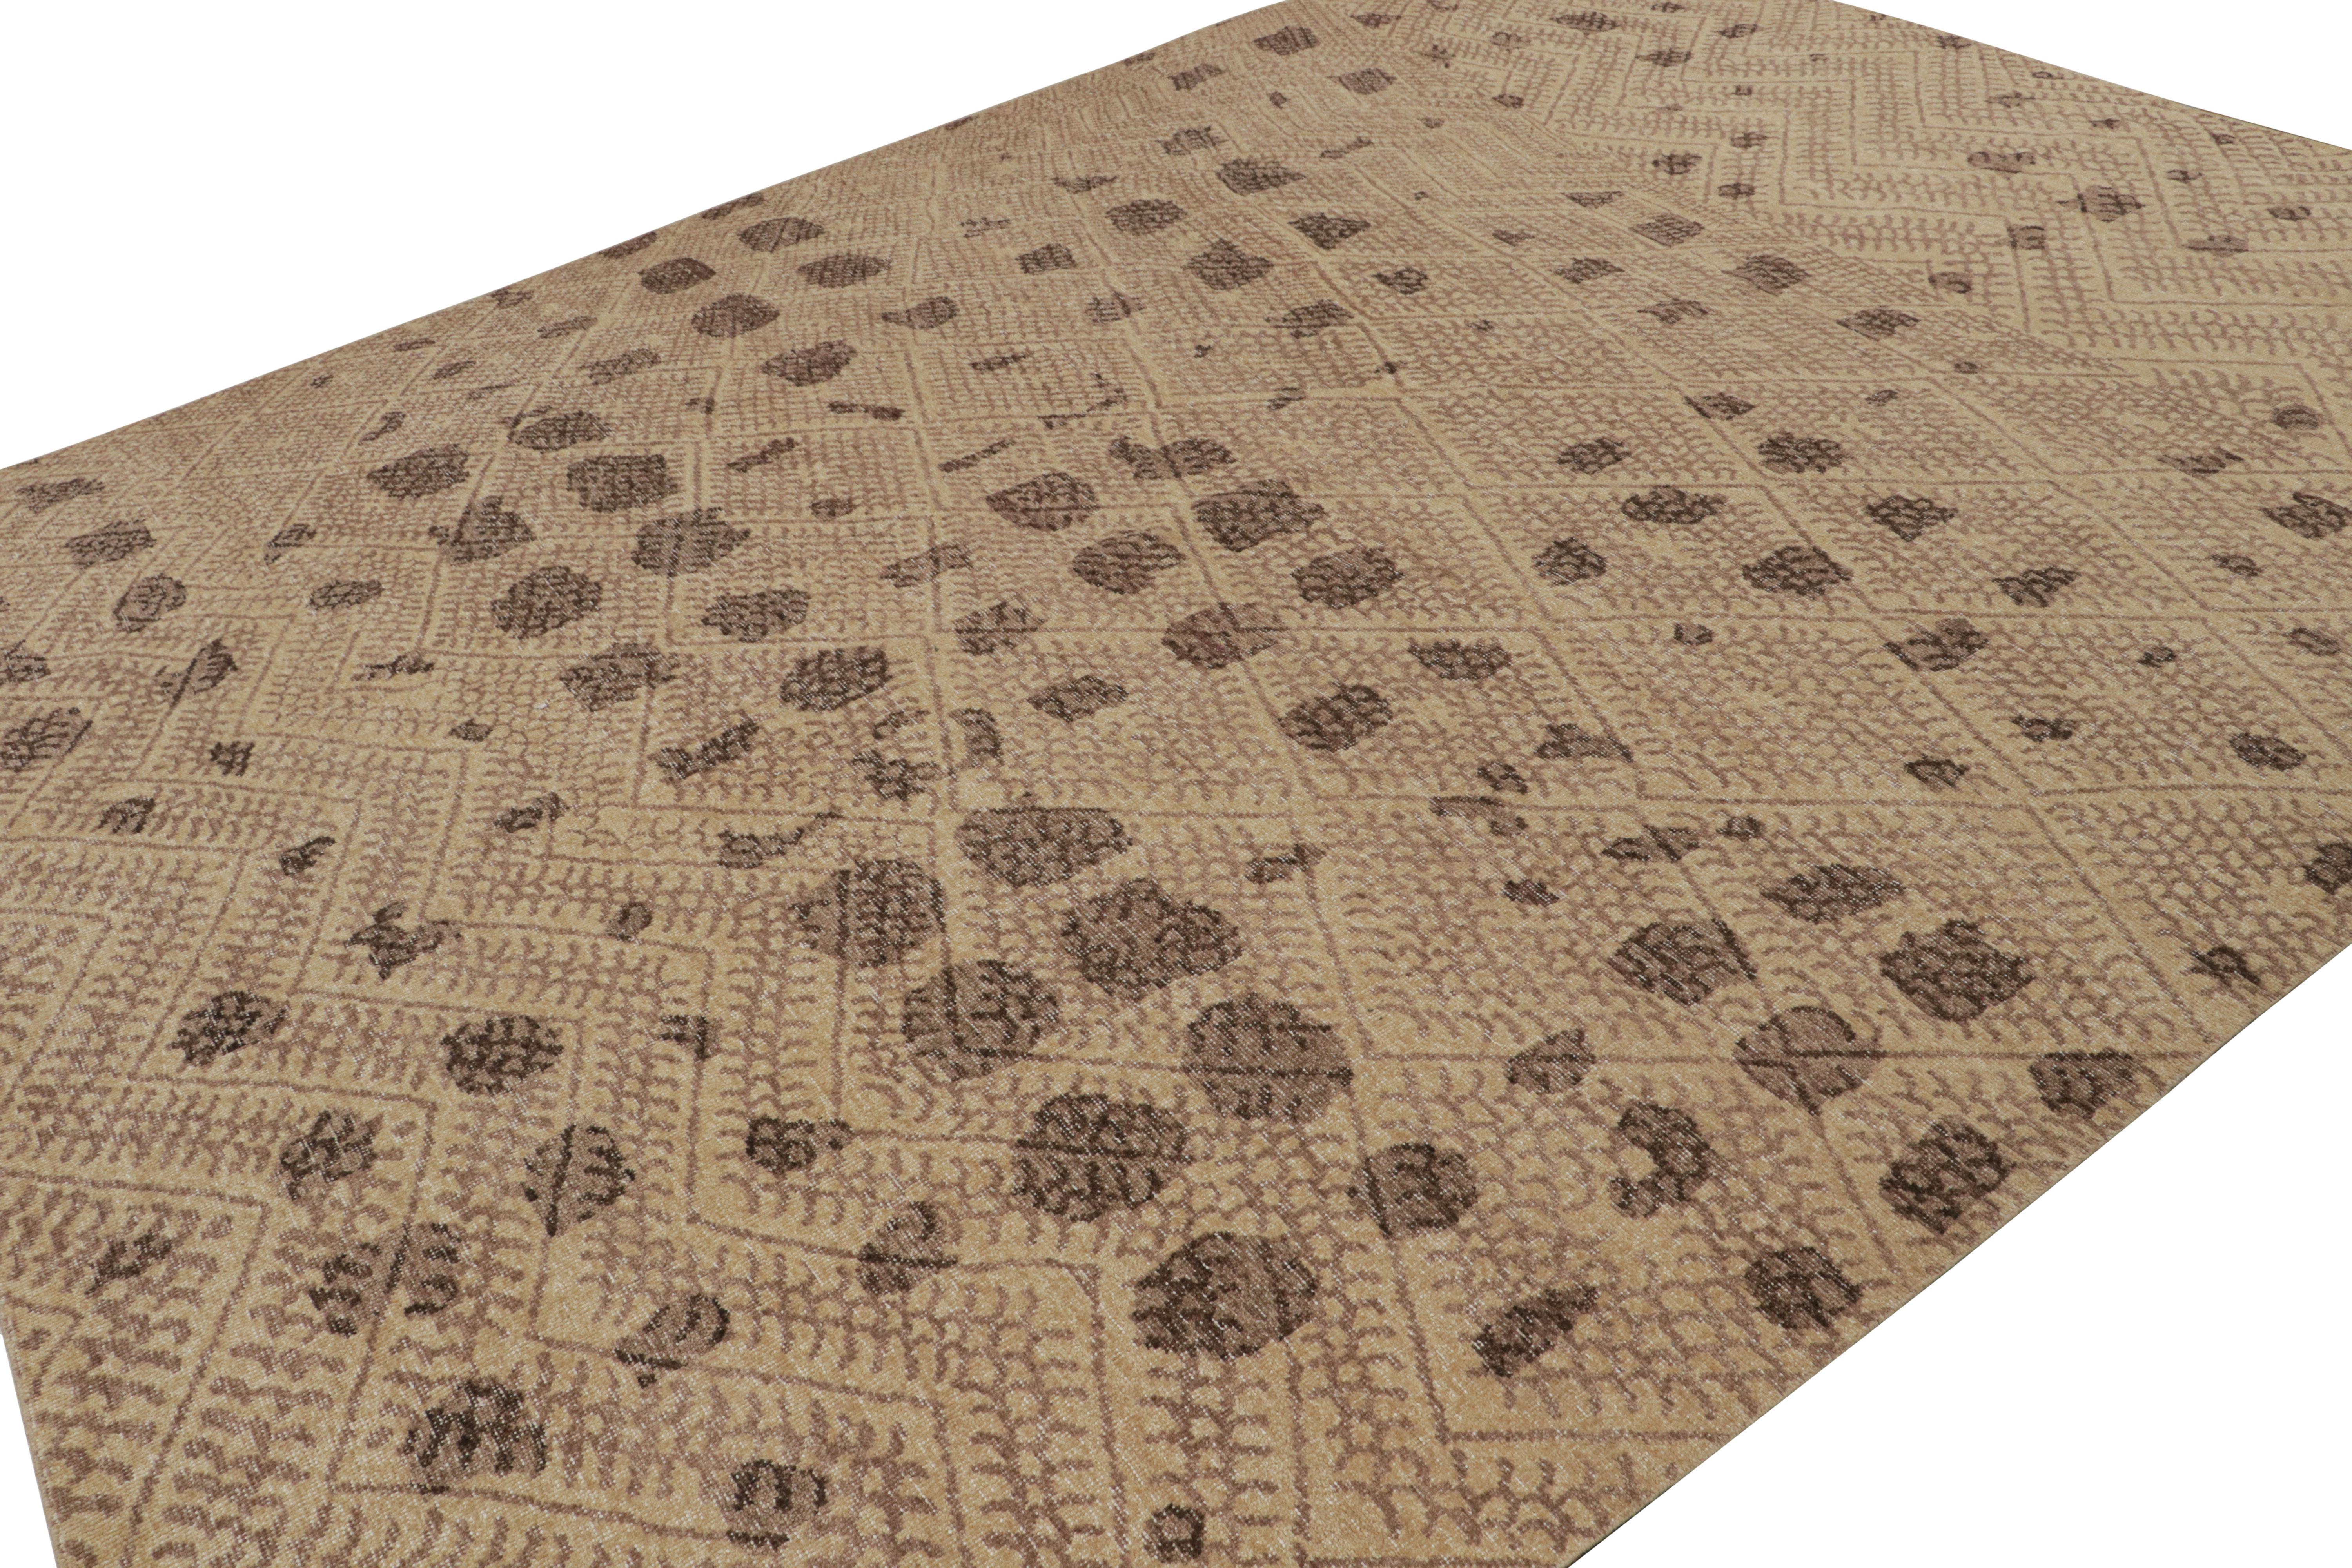 This 10x14 oversized rug is a bold new addition to the Homage Collection by Rug & Kilim. Hand-knotted in wool, this piece features geometric patterns inspired by the primitivist Berber style. 

On the Design: 

This design enjoys beige-brown